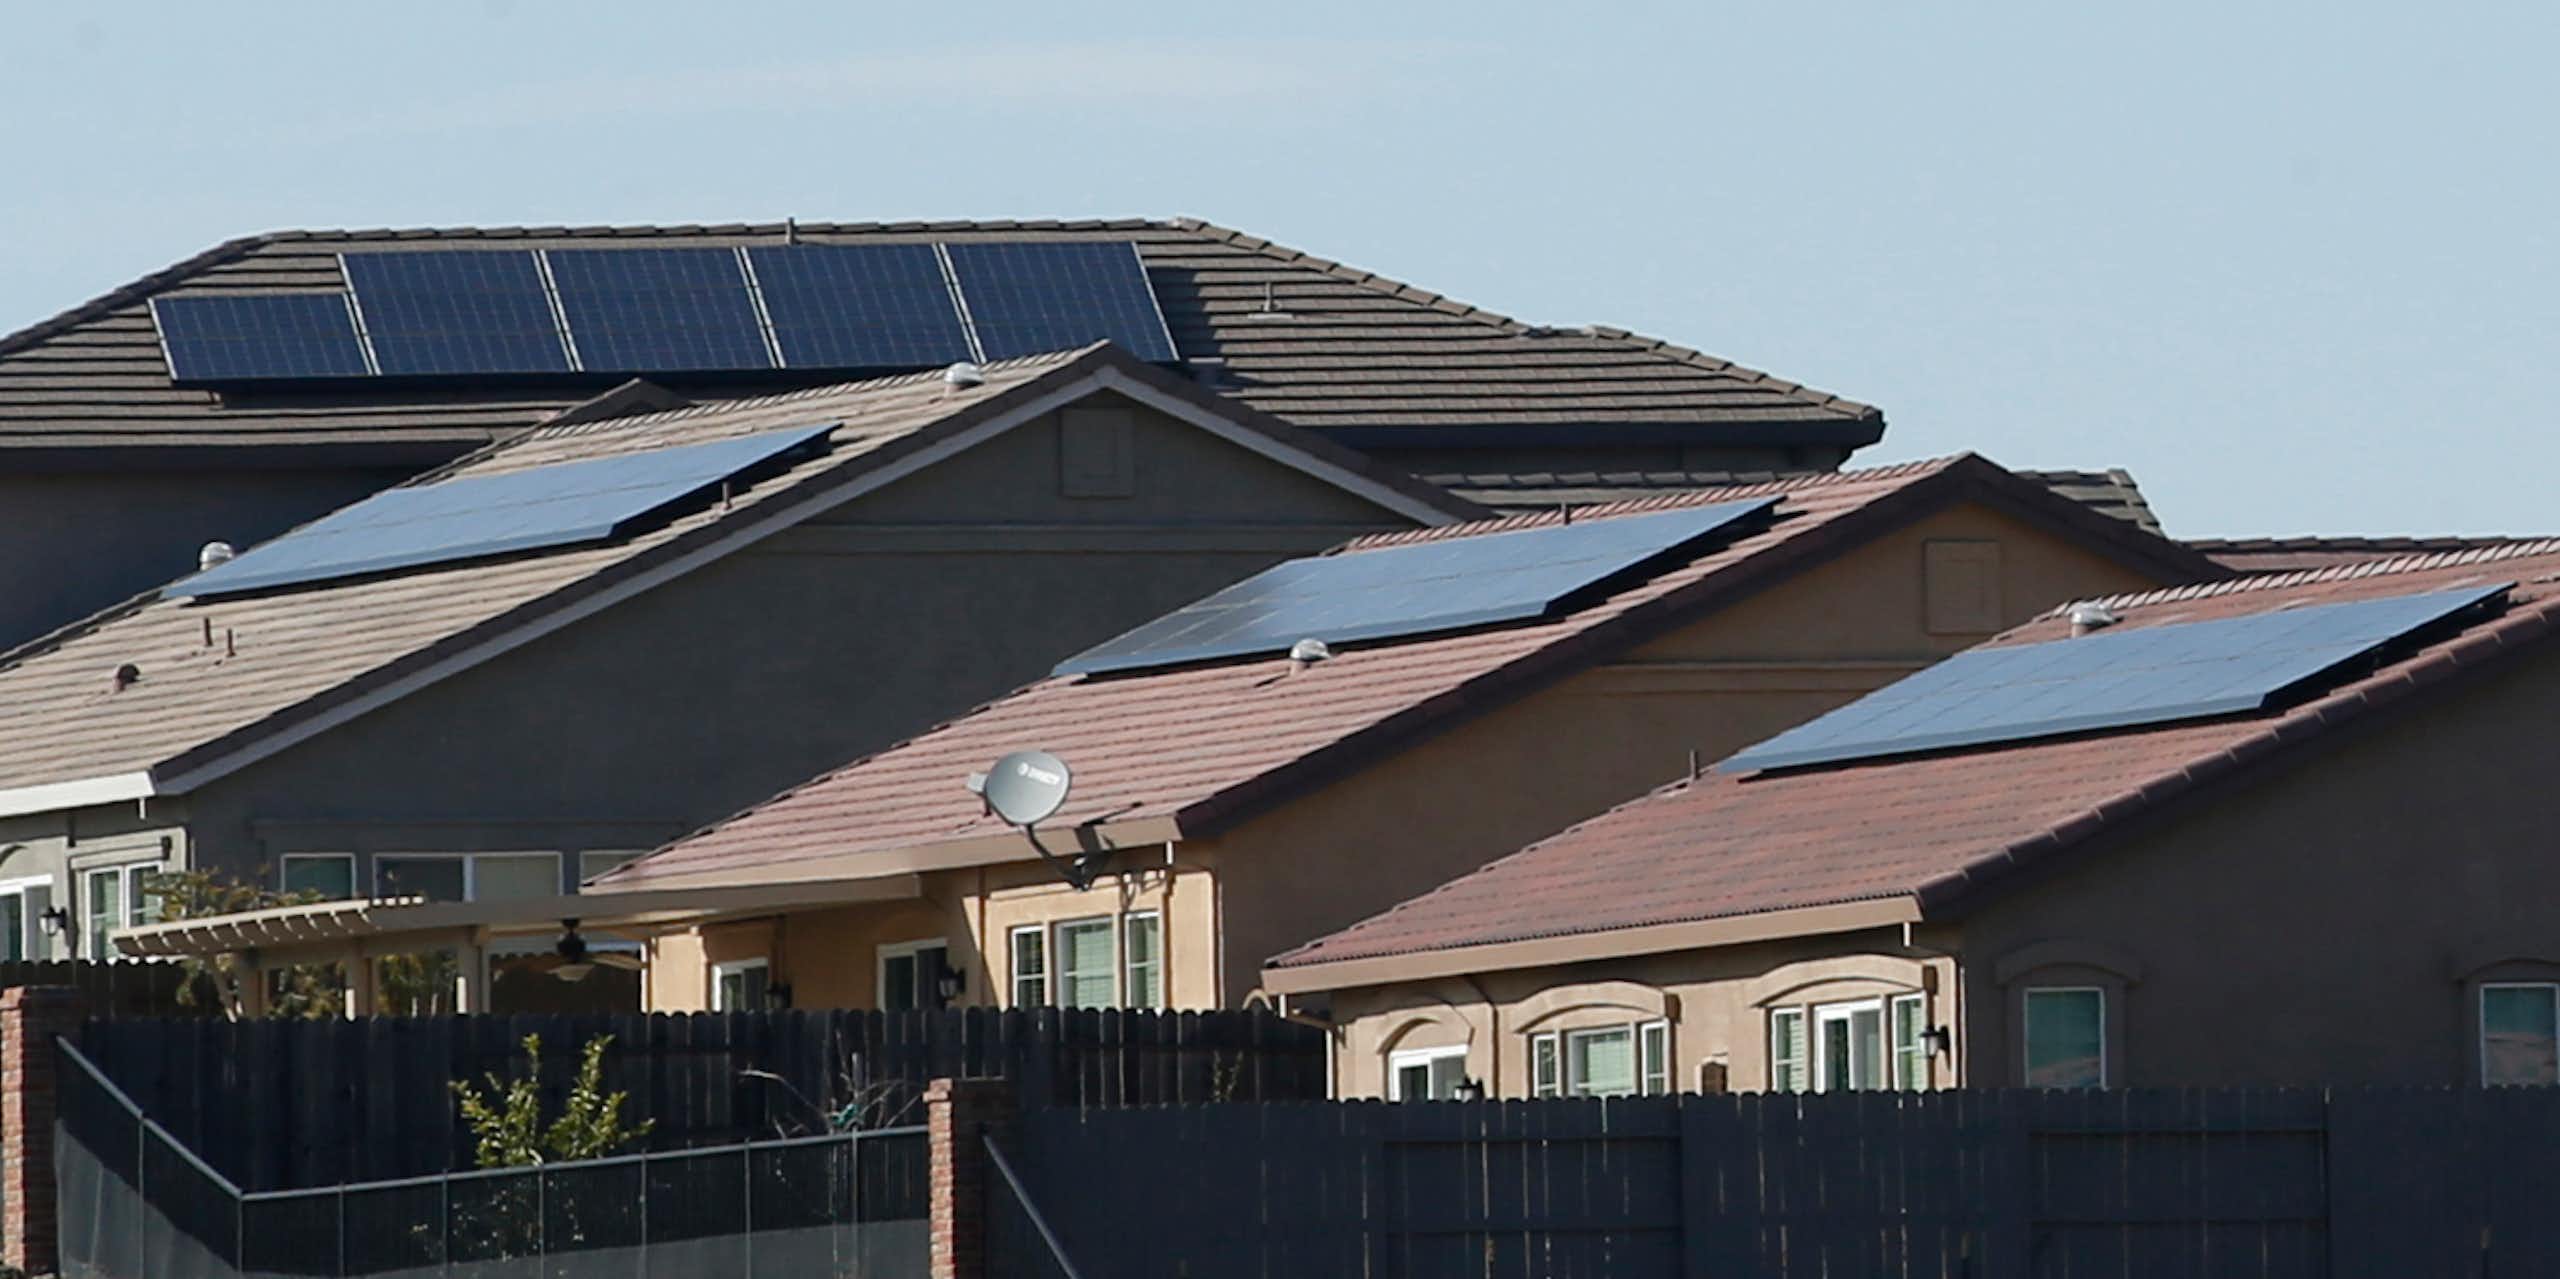 Four homes with solar panels on their roofs